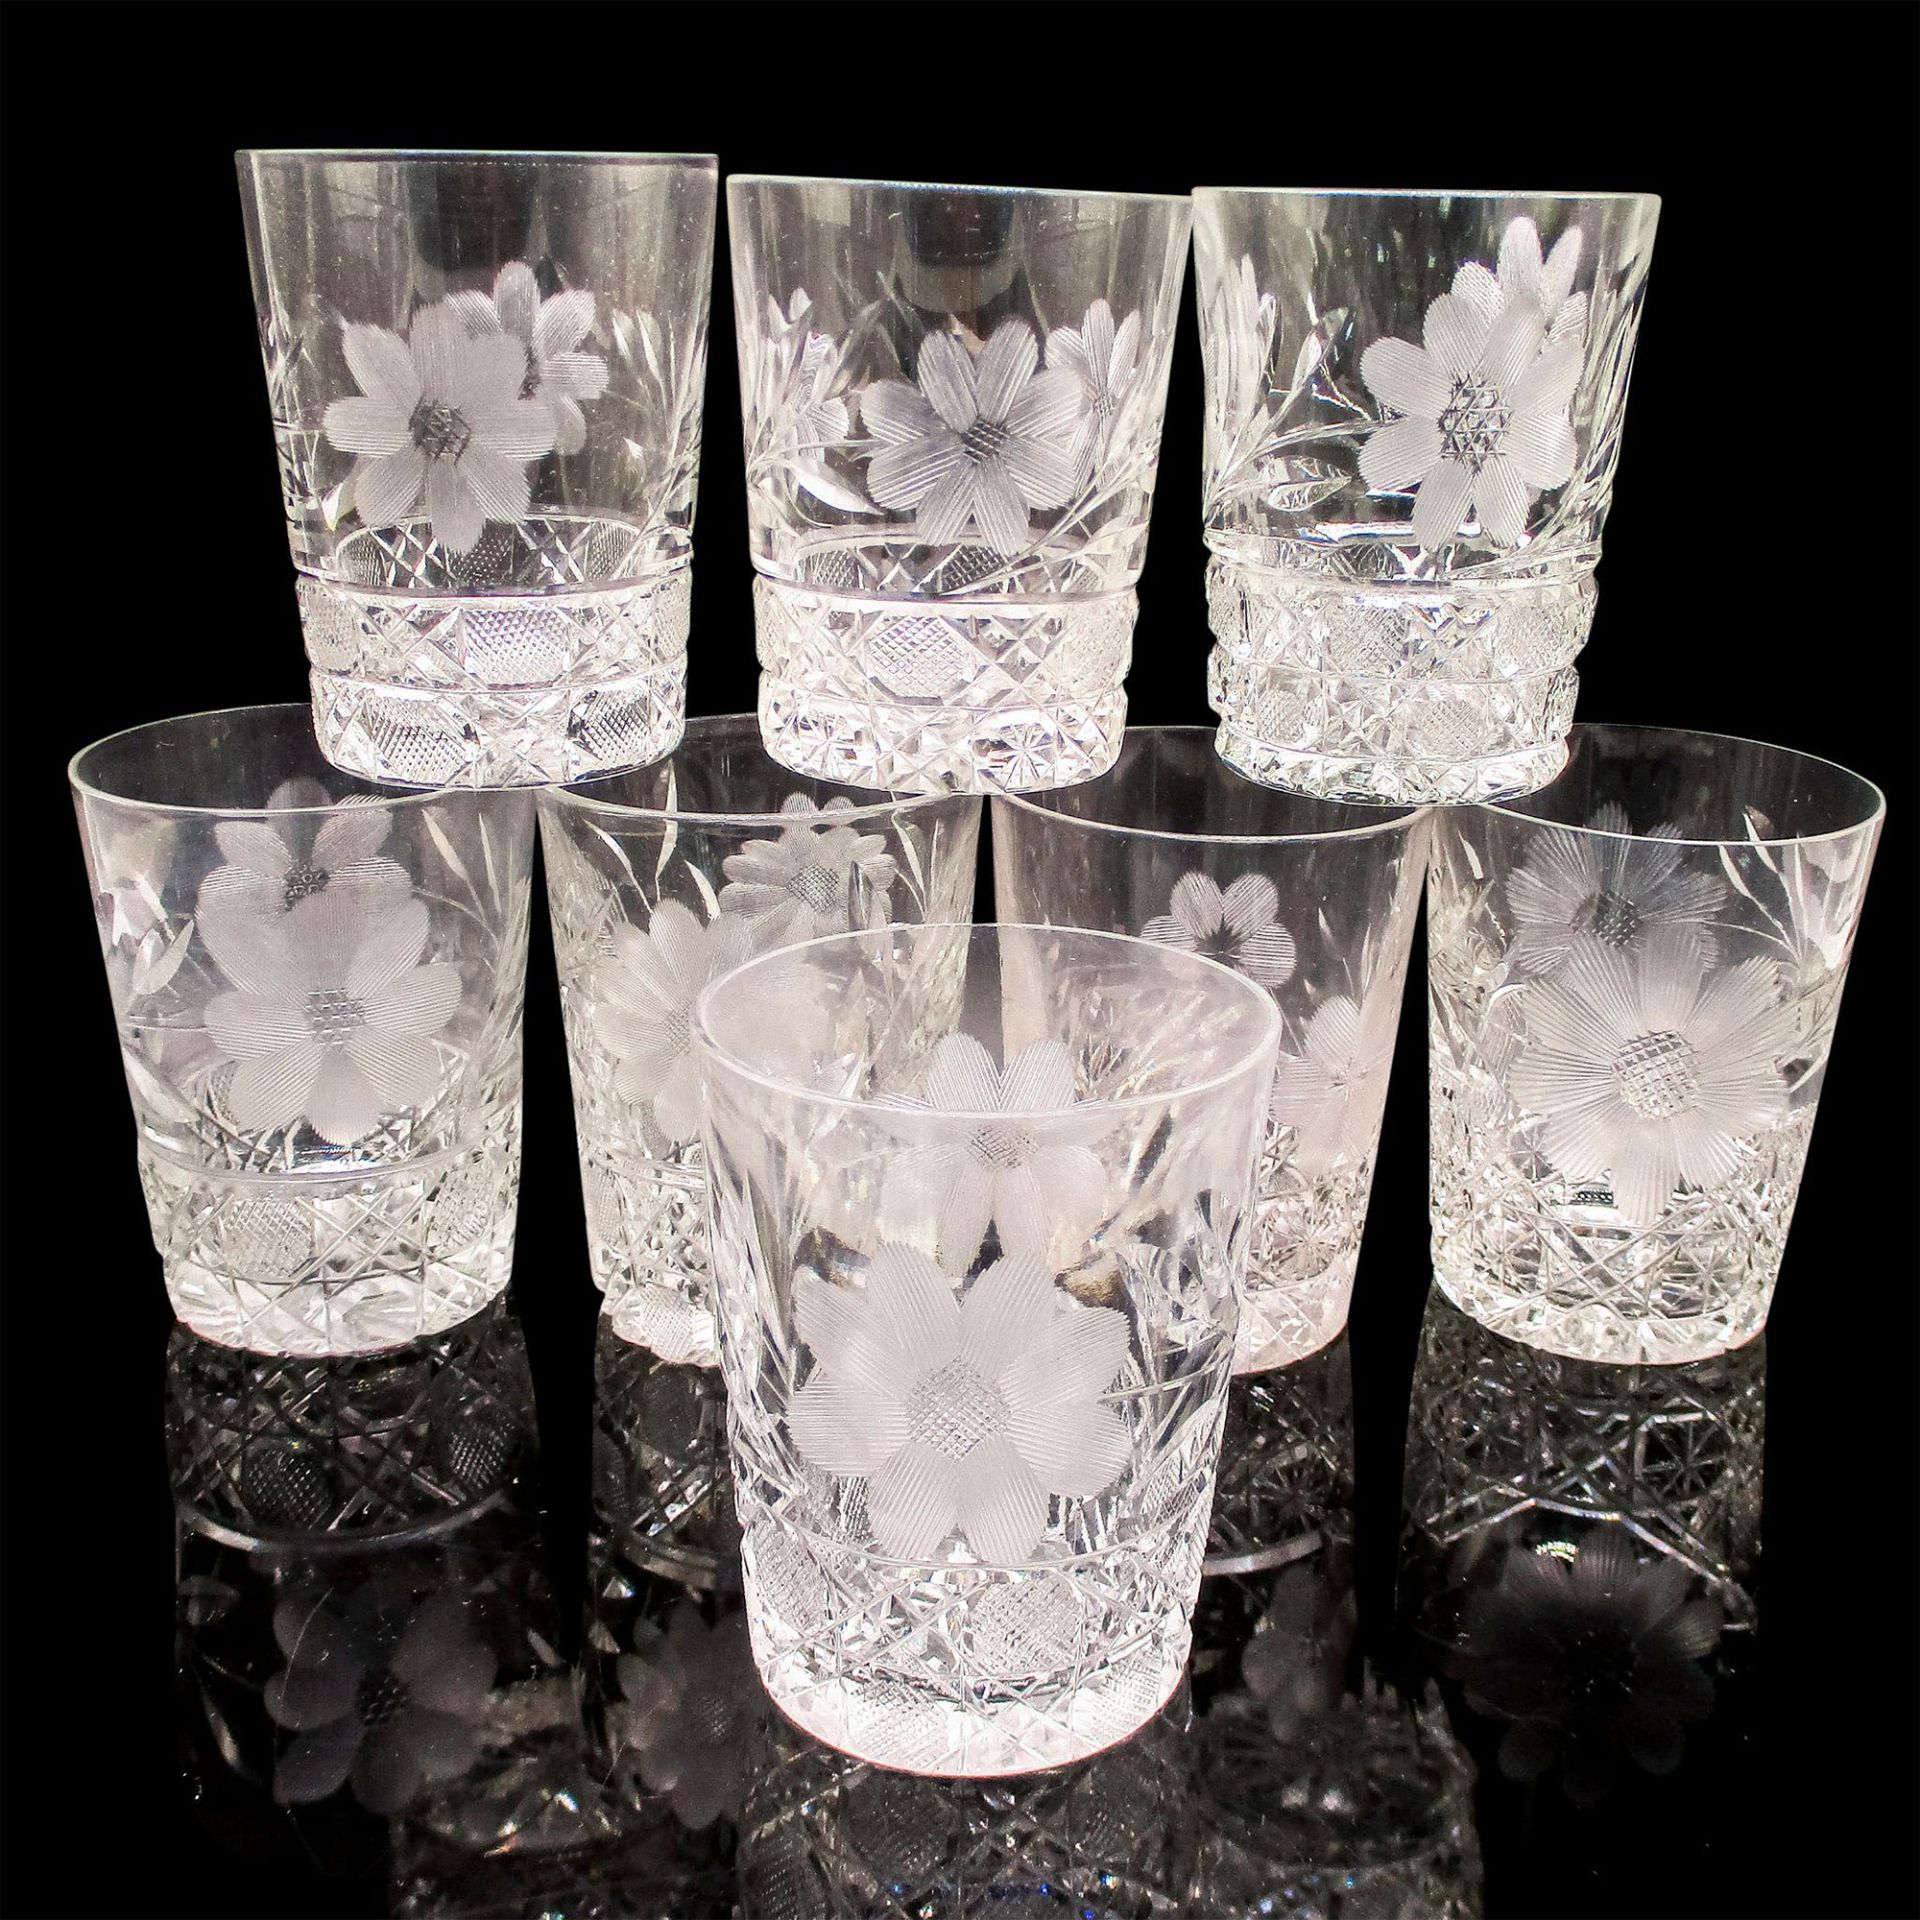 8pc Vintage Crystal Etched Whiskey Glasses - Image 2 of 8